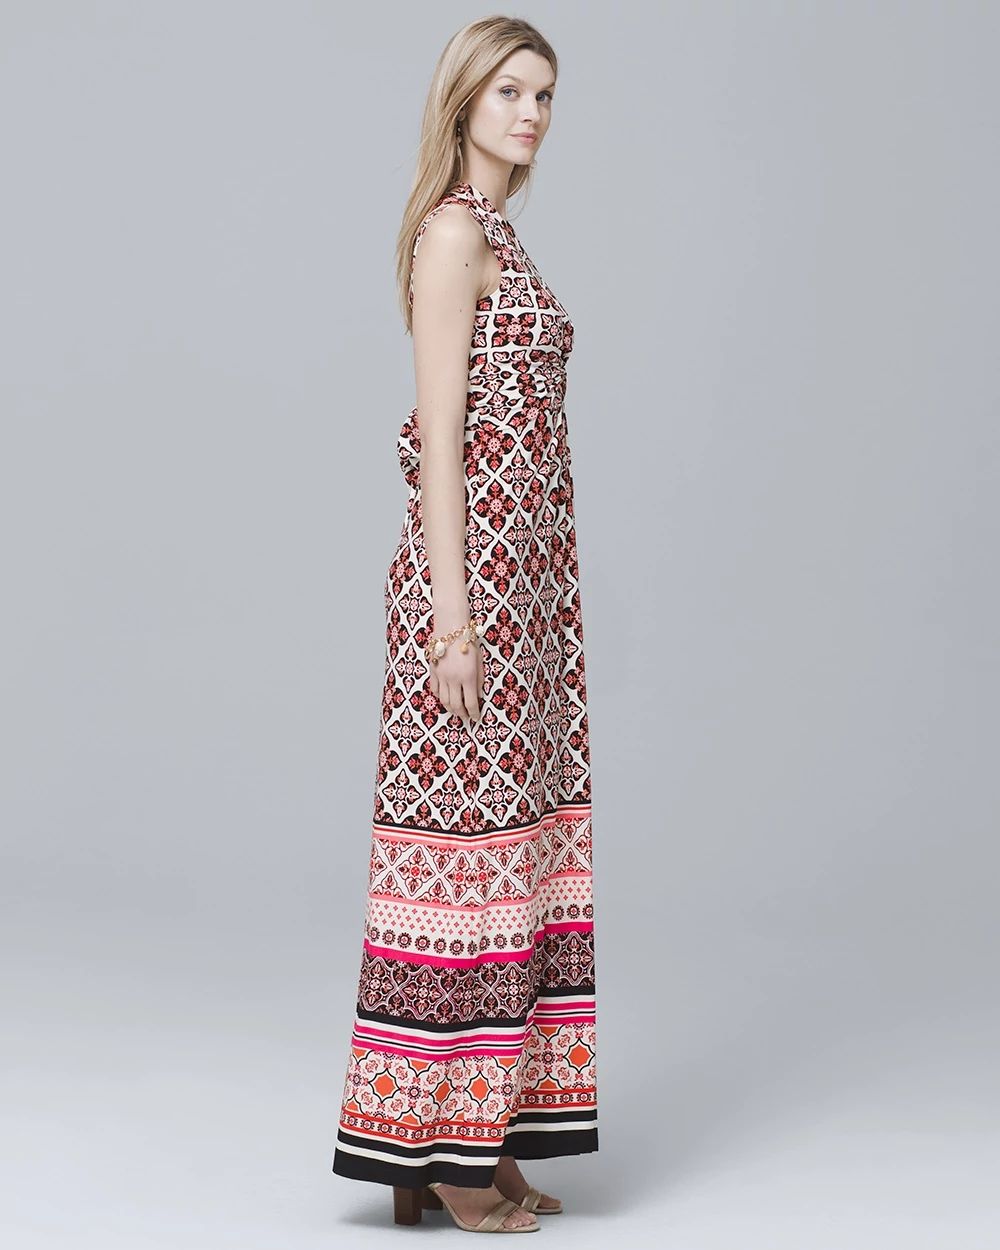 Twist-Detail Printed Knit Maxi Dress click to view larger image.